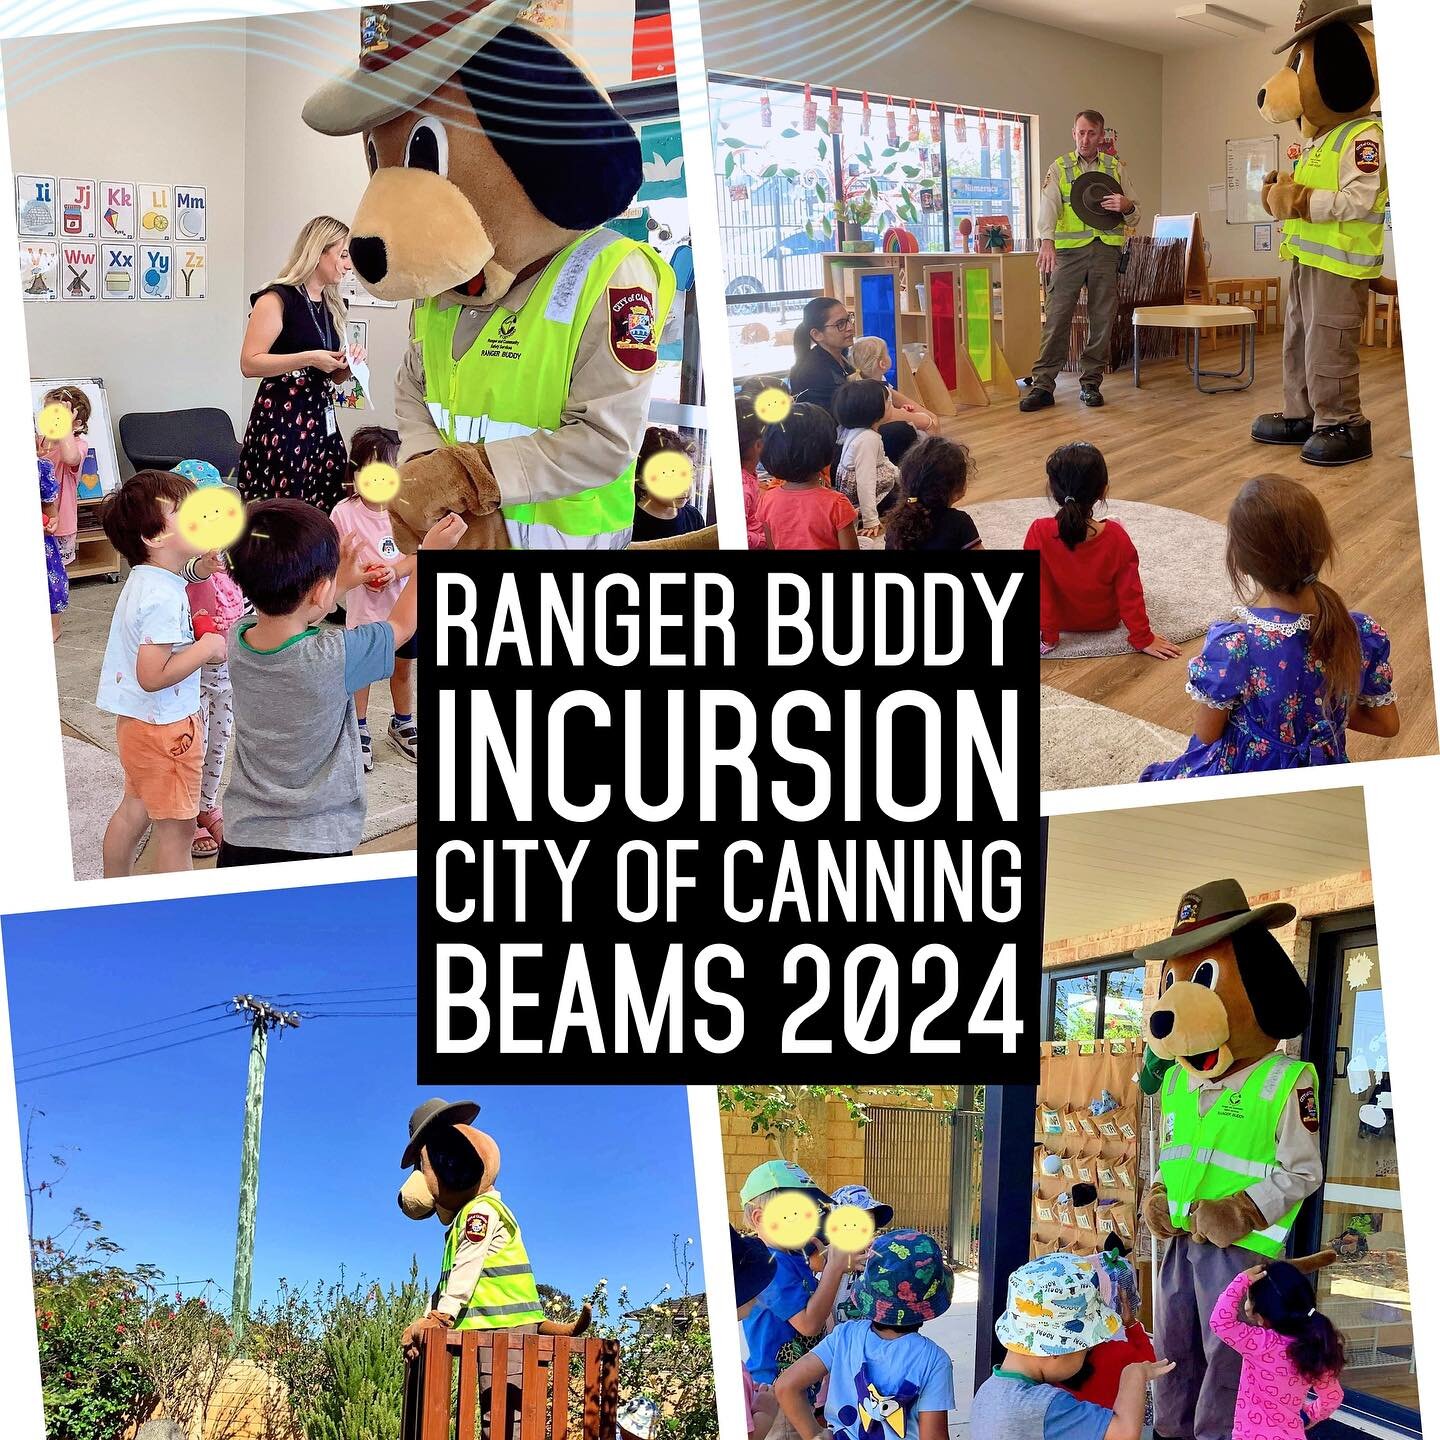 Special thanks to Ranger Buddy for coming down today to meet the children! 🐶 

The children really enjoyed learning about park rangers and loved the bouncy balls and ranger buddy colouring in sheets. Thank you @city_of_canning for this amazing exper